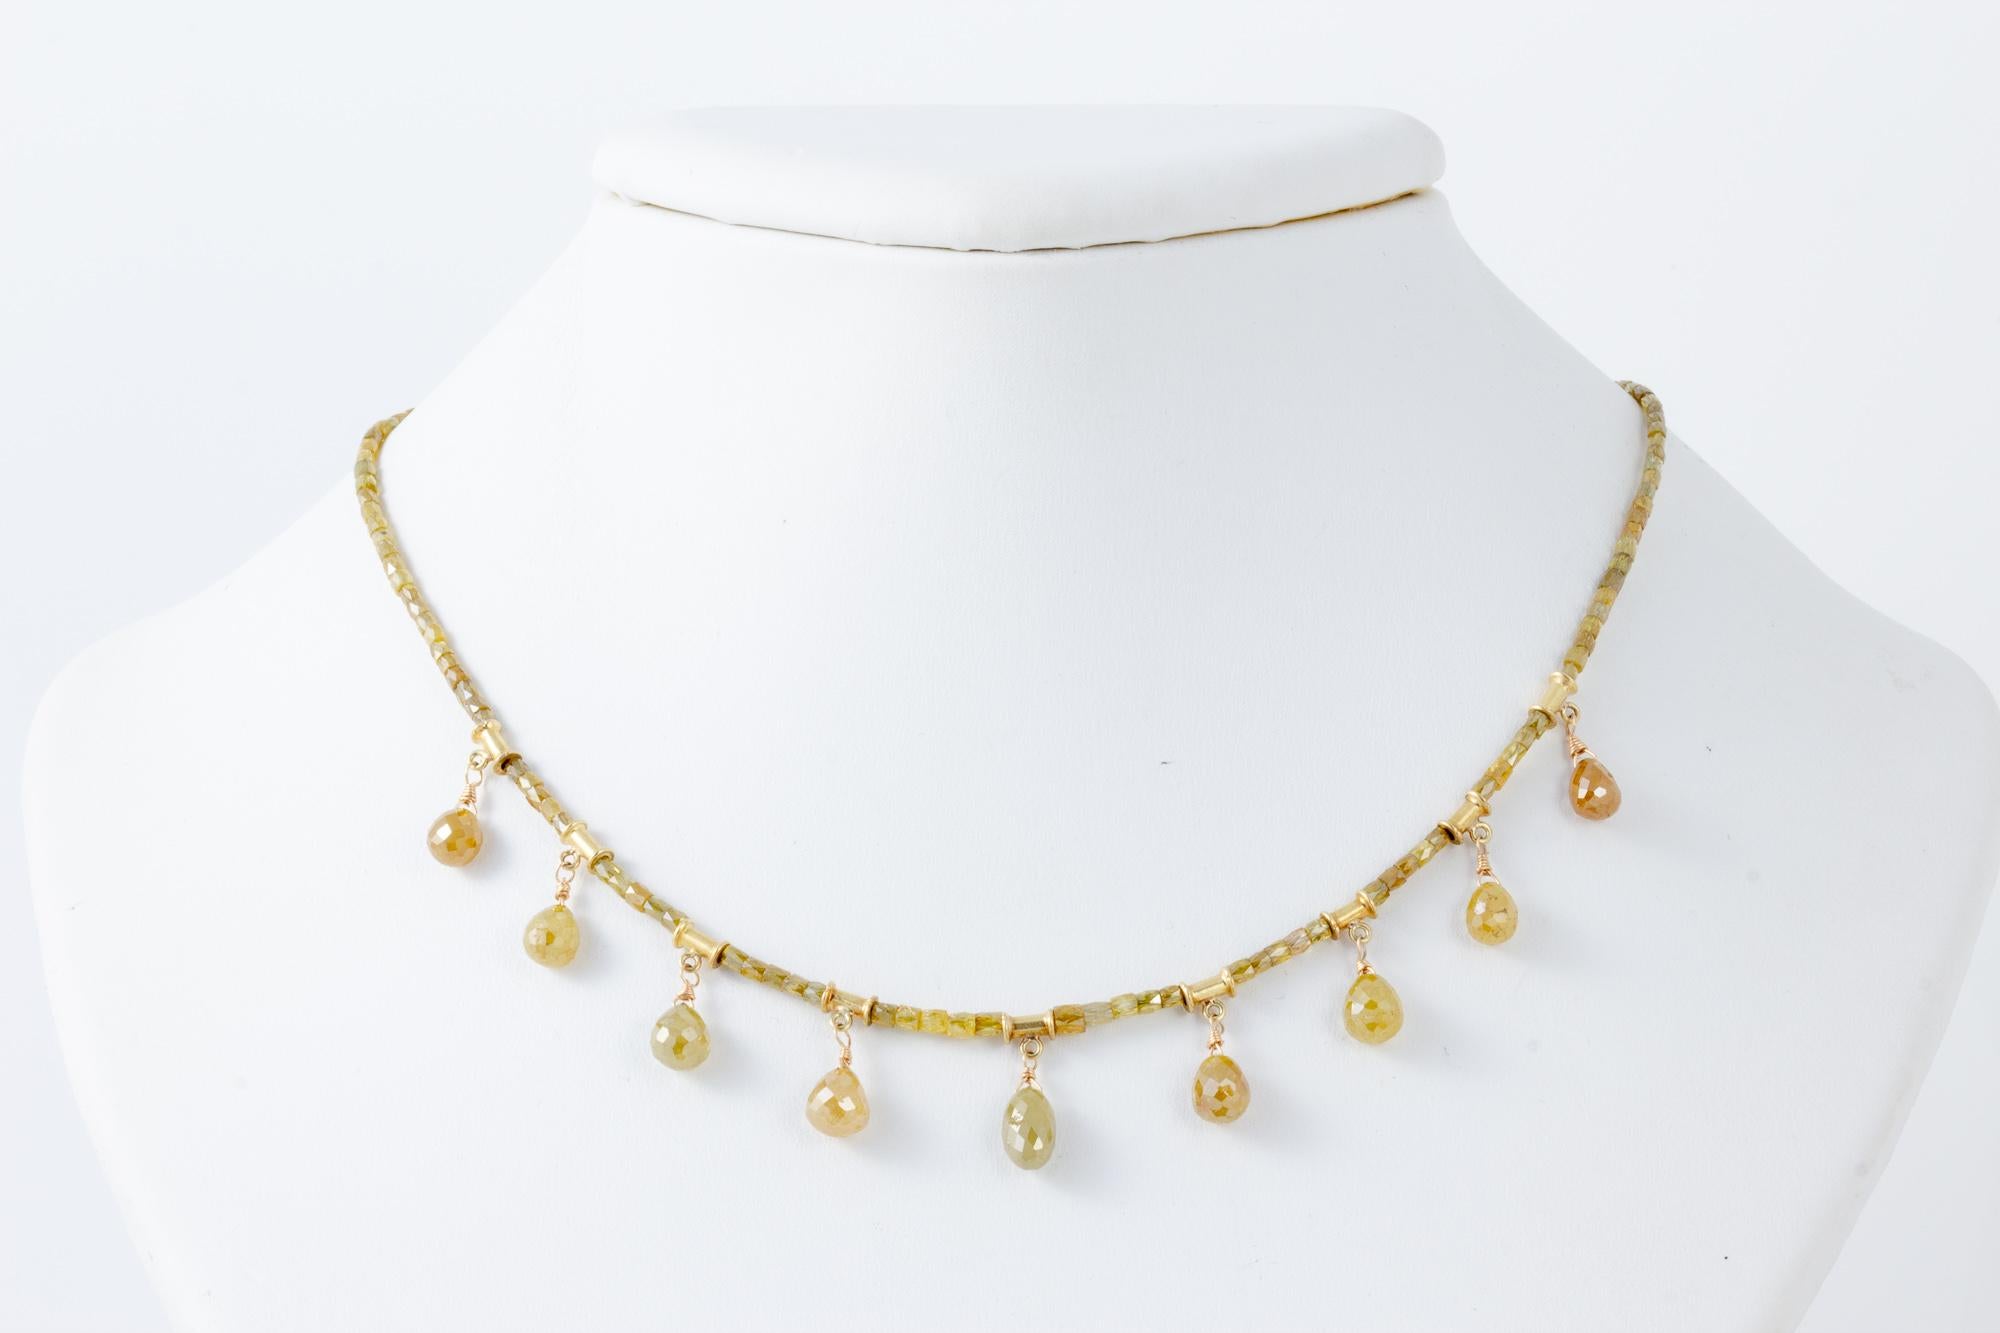 Employing 18 carats of beautifully cut untreated natural colored diamonds, this versatile necklace dazzles in any light and wears as easily with jeans and a t shirt as with a little black dress.  Whoever coined the term 